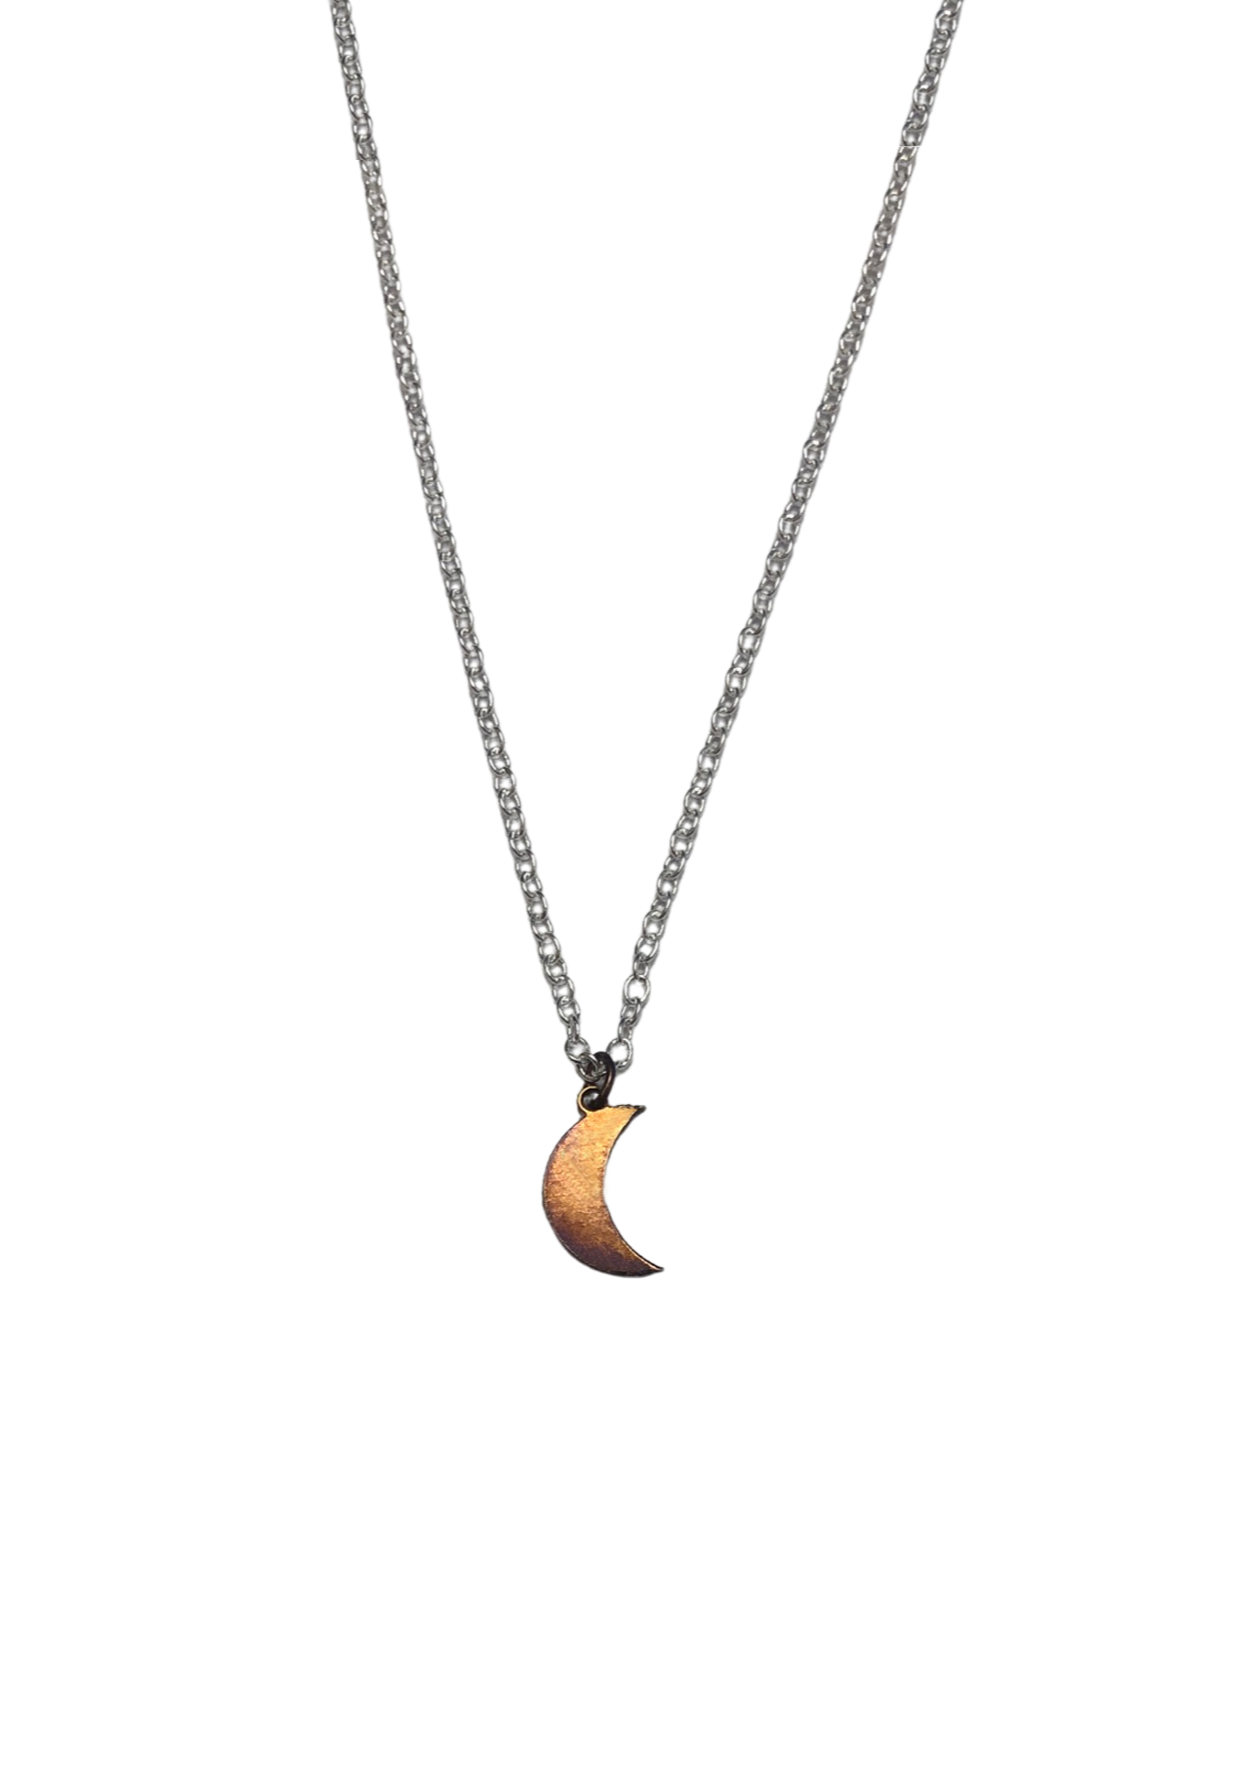 Moon Charm Necklace - .925 Sterling Silver / Rose Vermeil